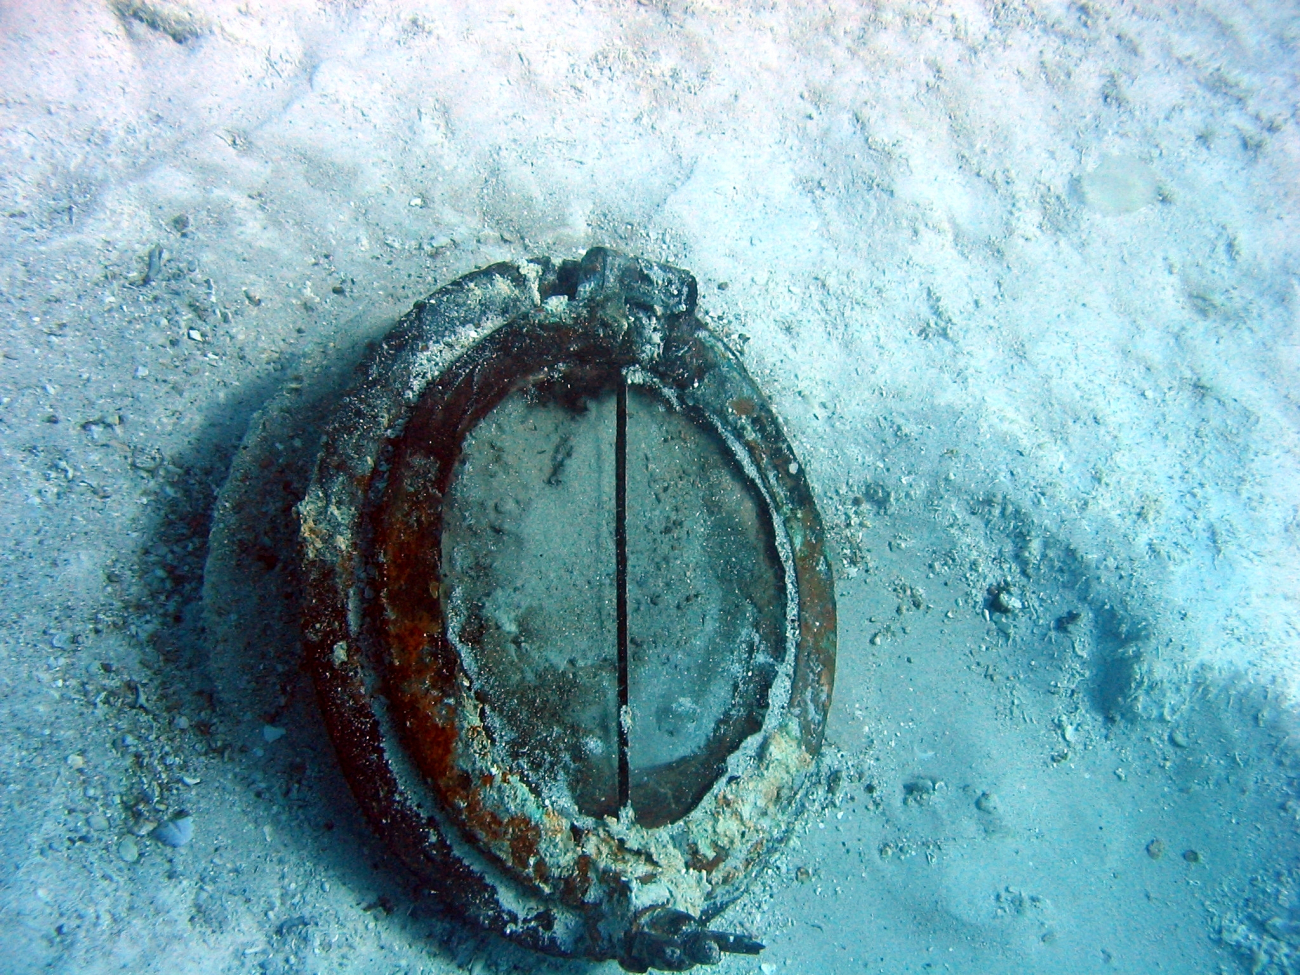 Port hole window from early Twentieth Century wreck on Pearl and Hermes Reef